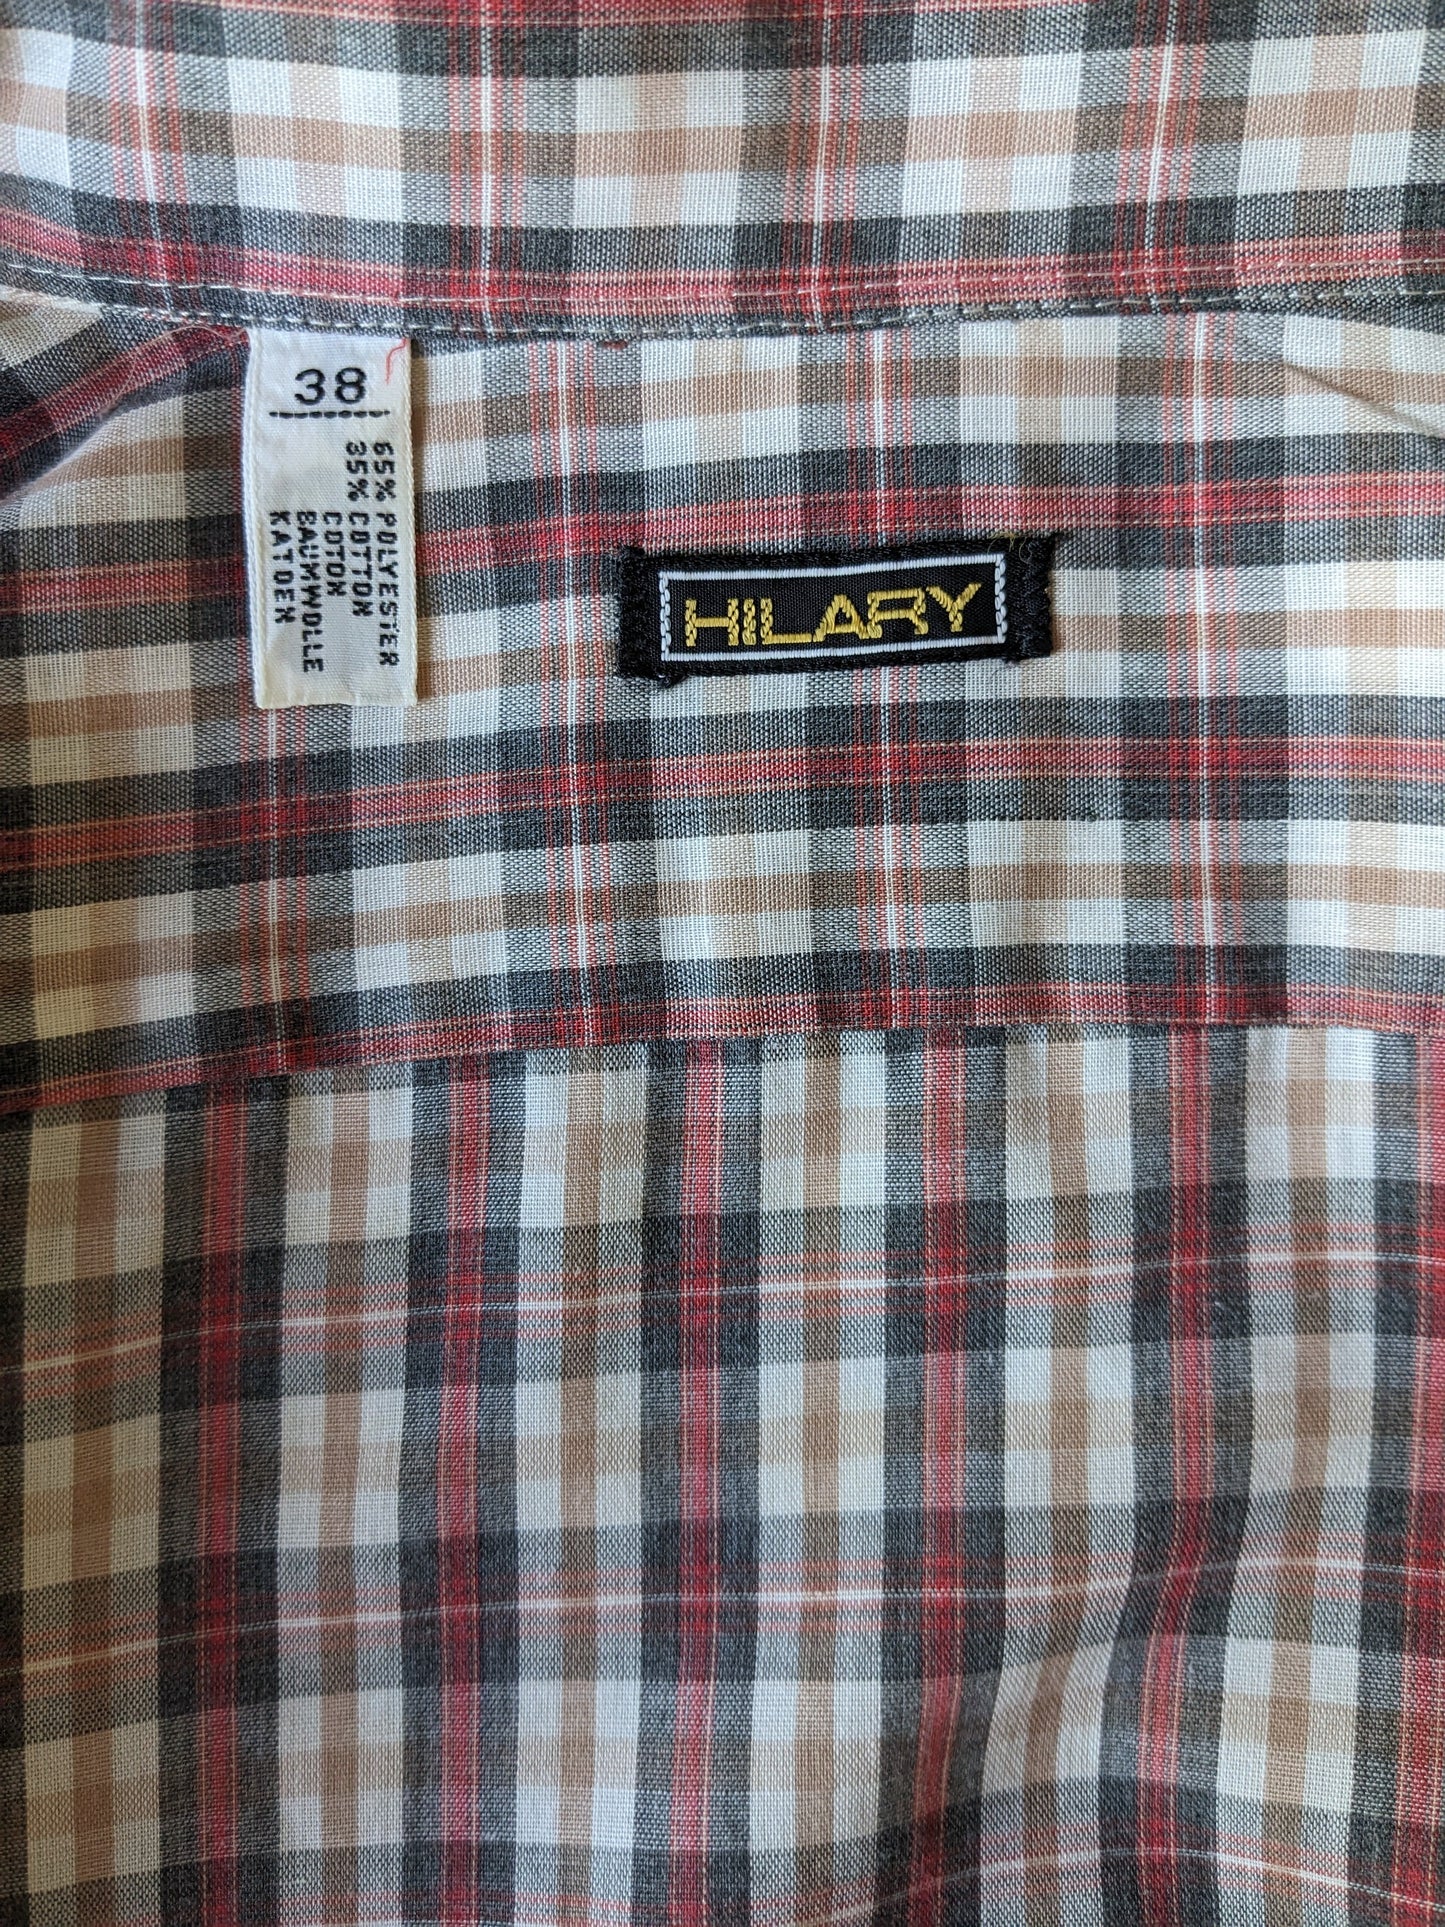 Vintage 70's Hilary tailed shirt. Red black pink checkered. Size 38 / S.